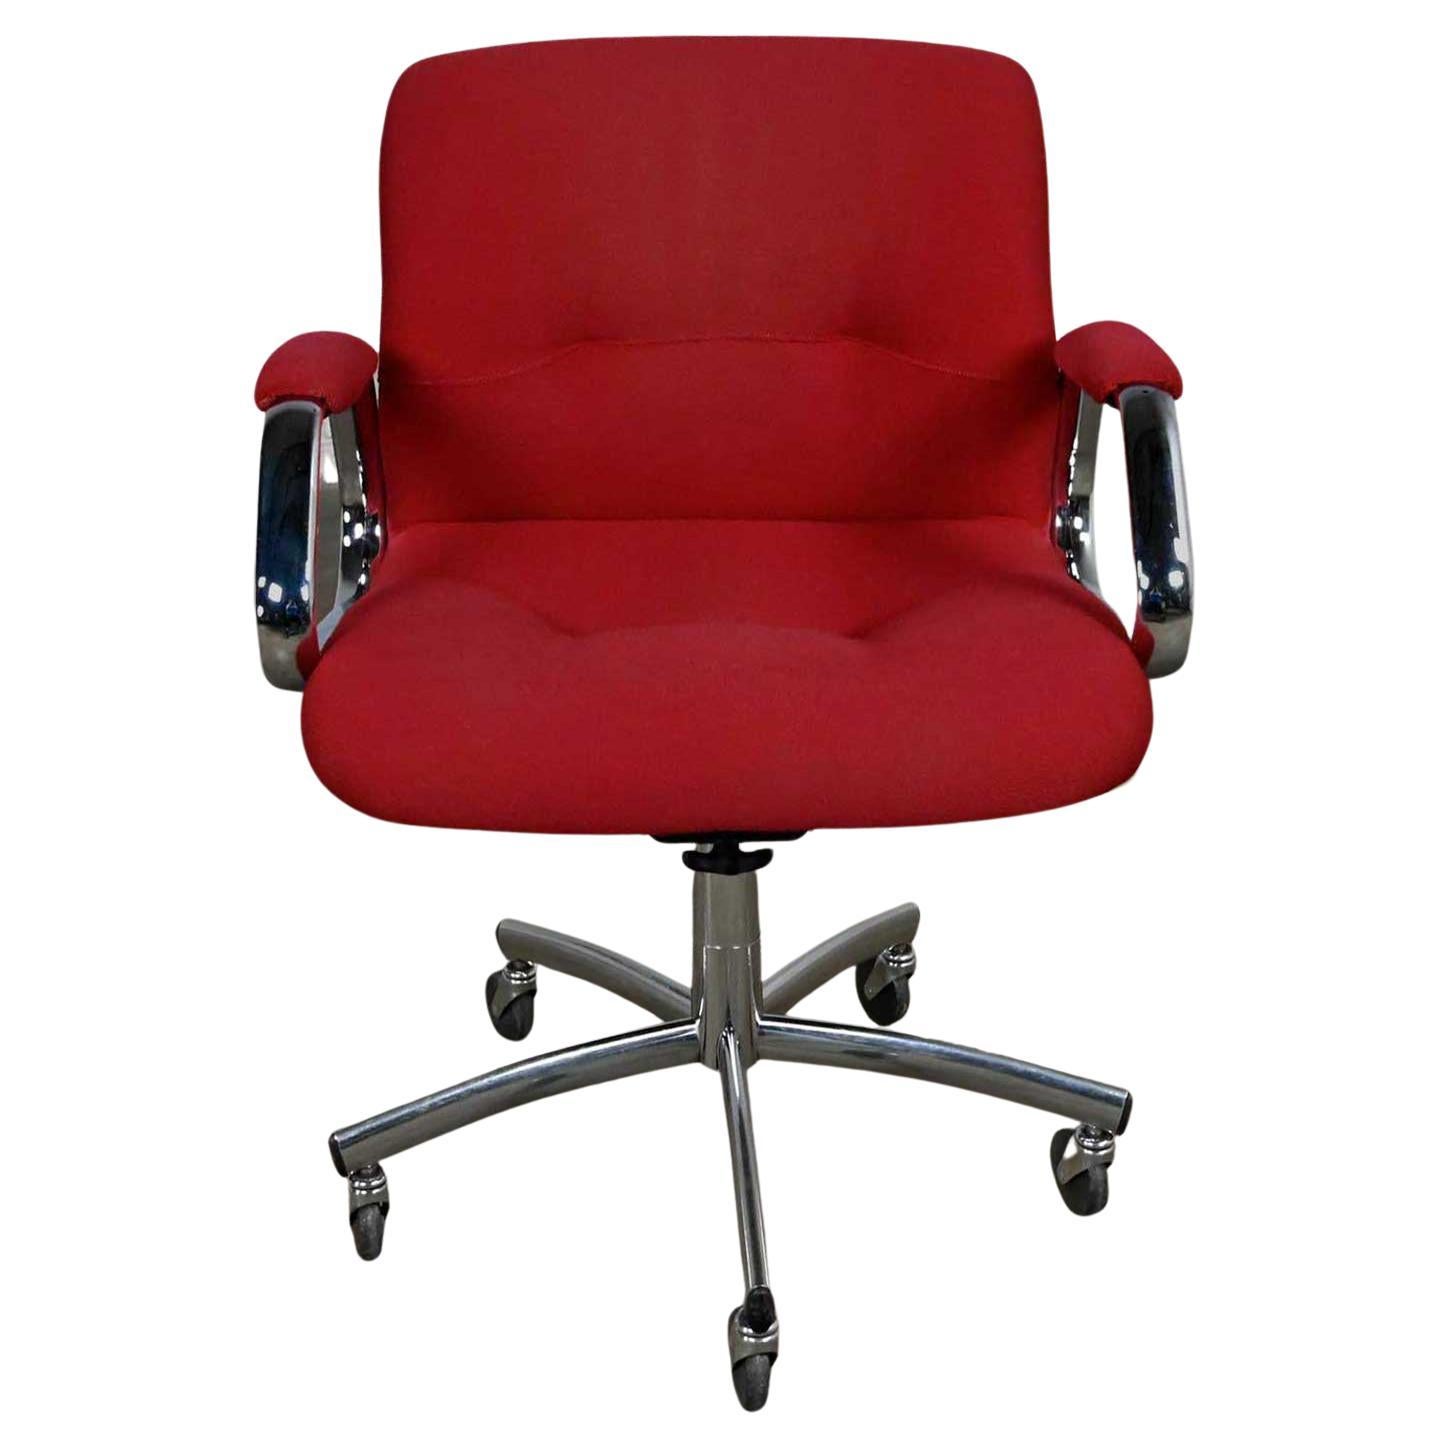 Modern Steelcase Chrome & Red Swivel Rolling Chair #454 Style Charles Pollock For Sale